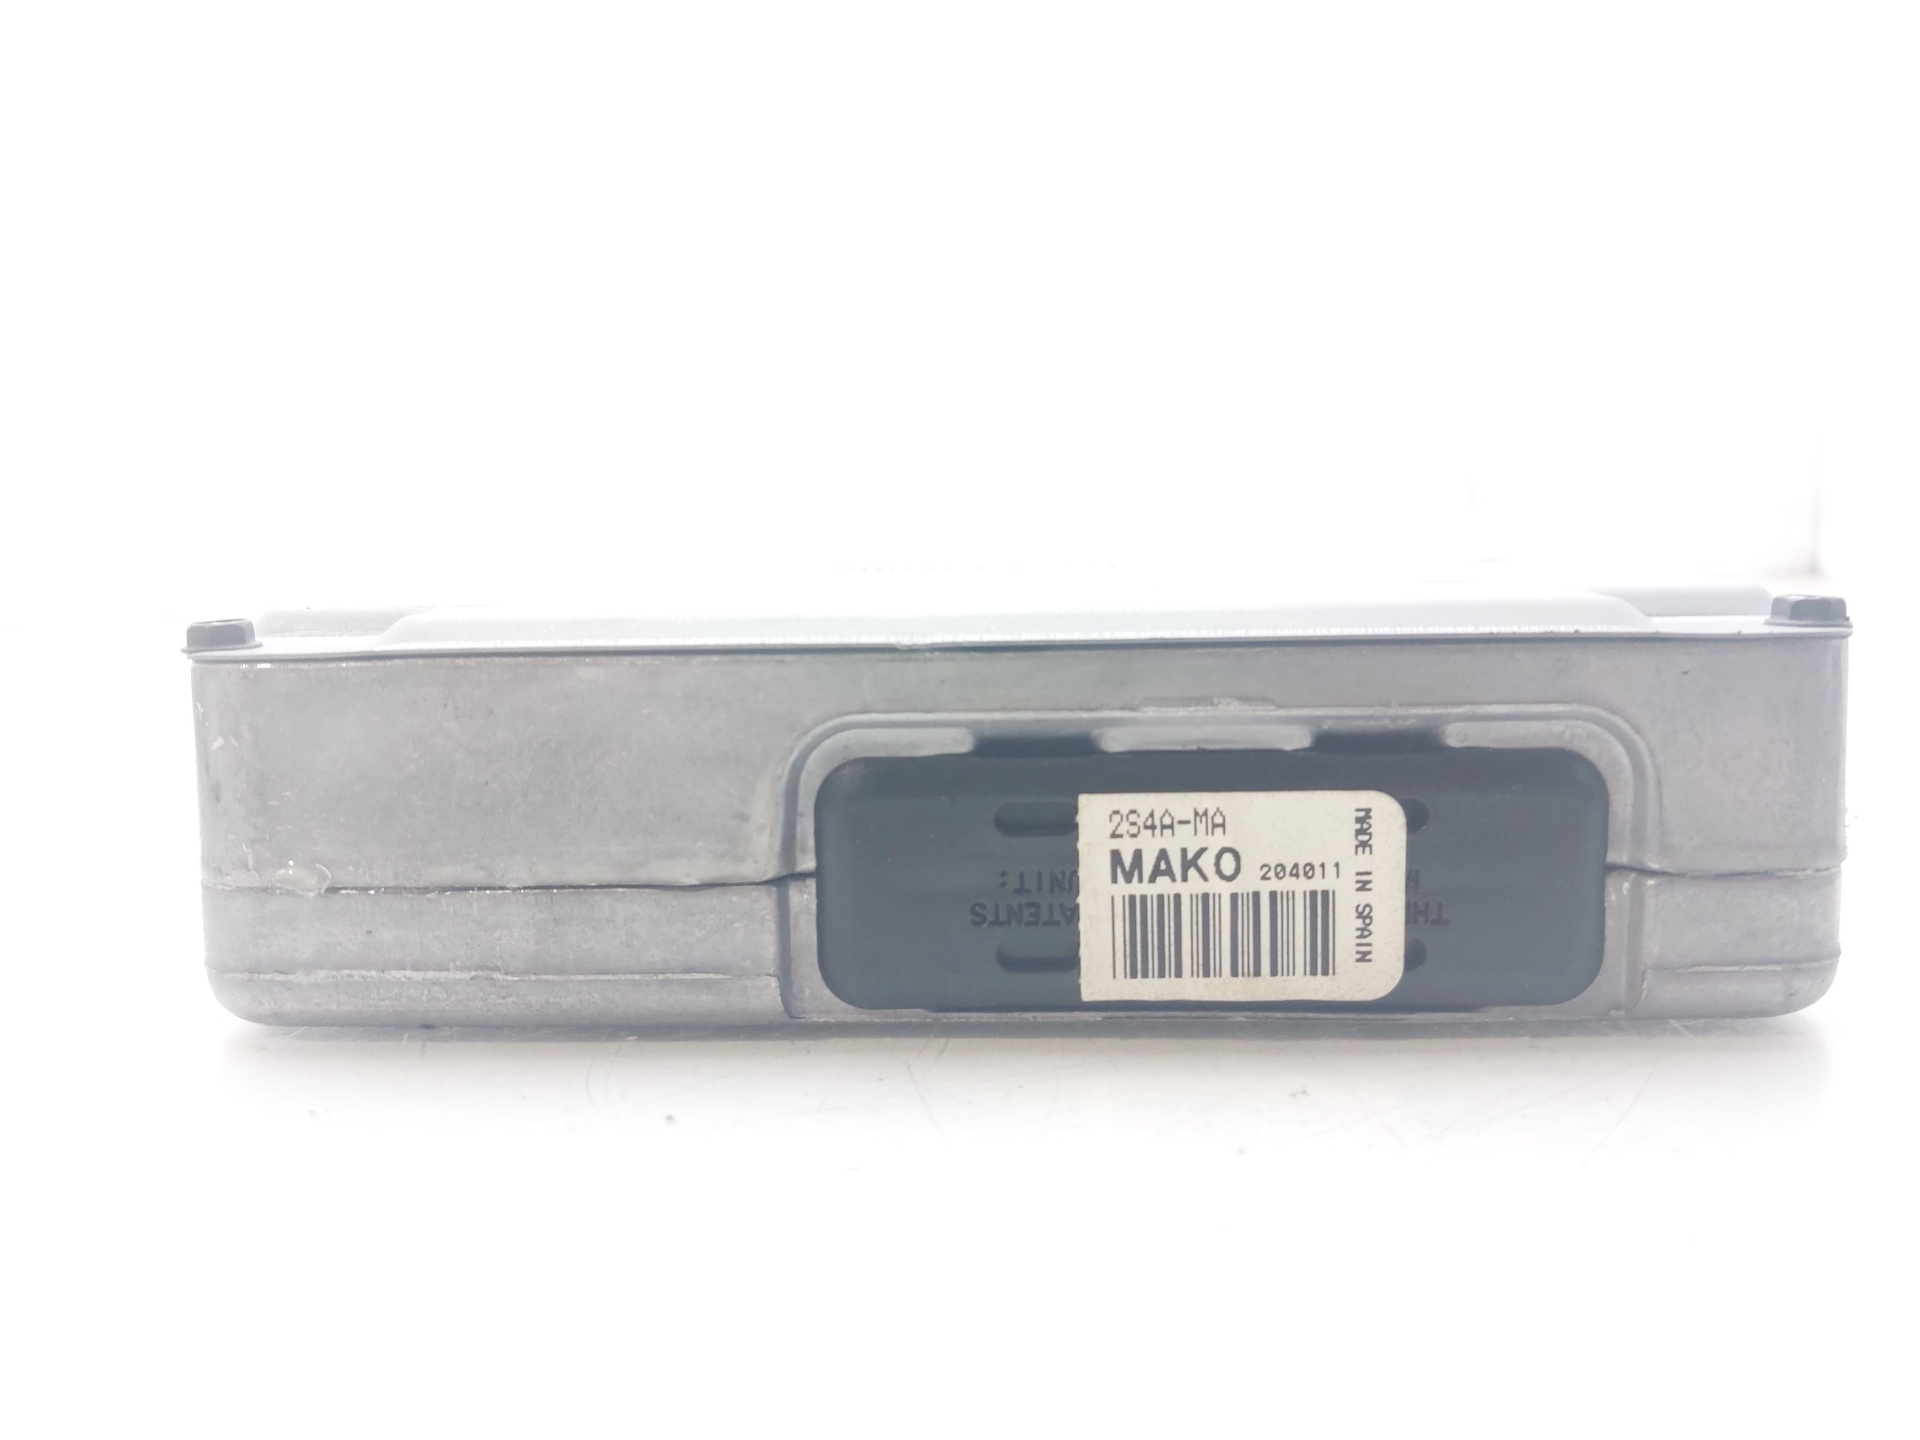 FORD Focus 1 generation (1998-2010) Moottorin ohjausyksikkö ECU 2S4A12A650MA 22483224